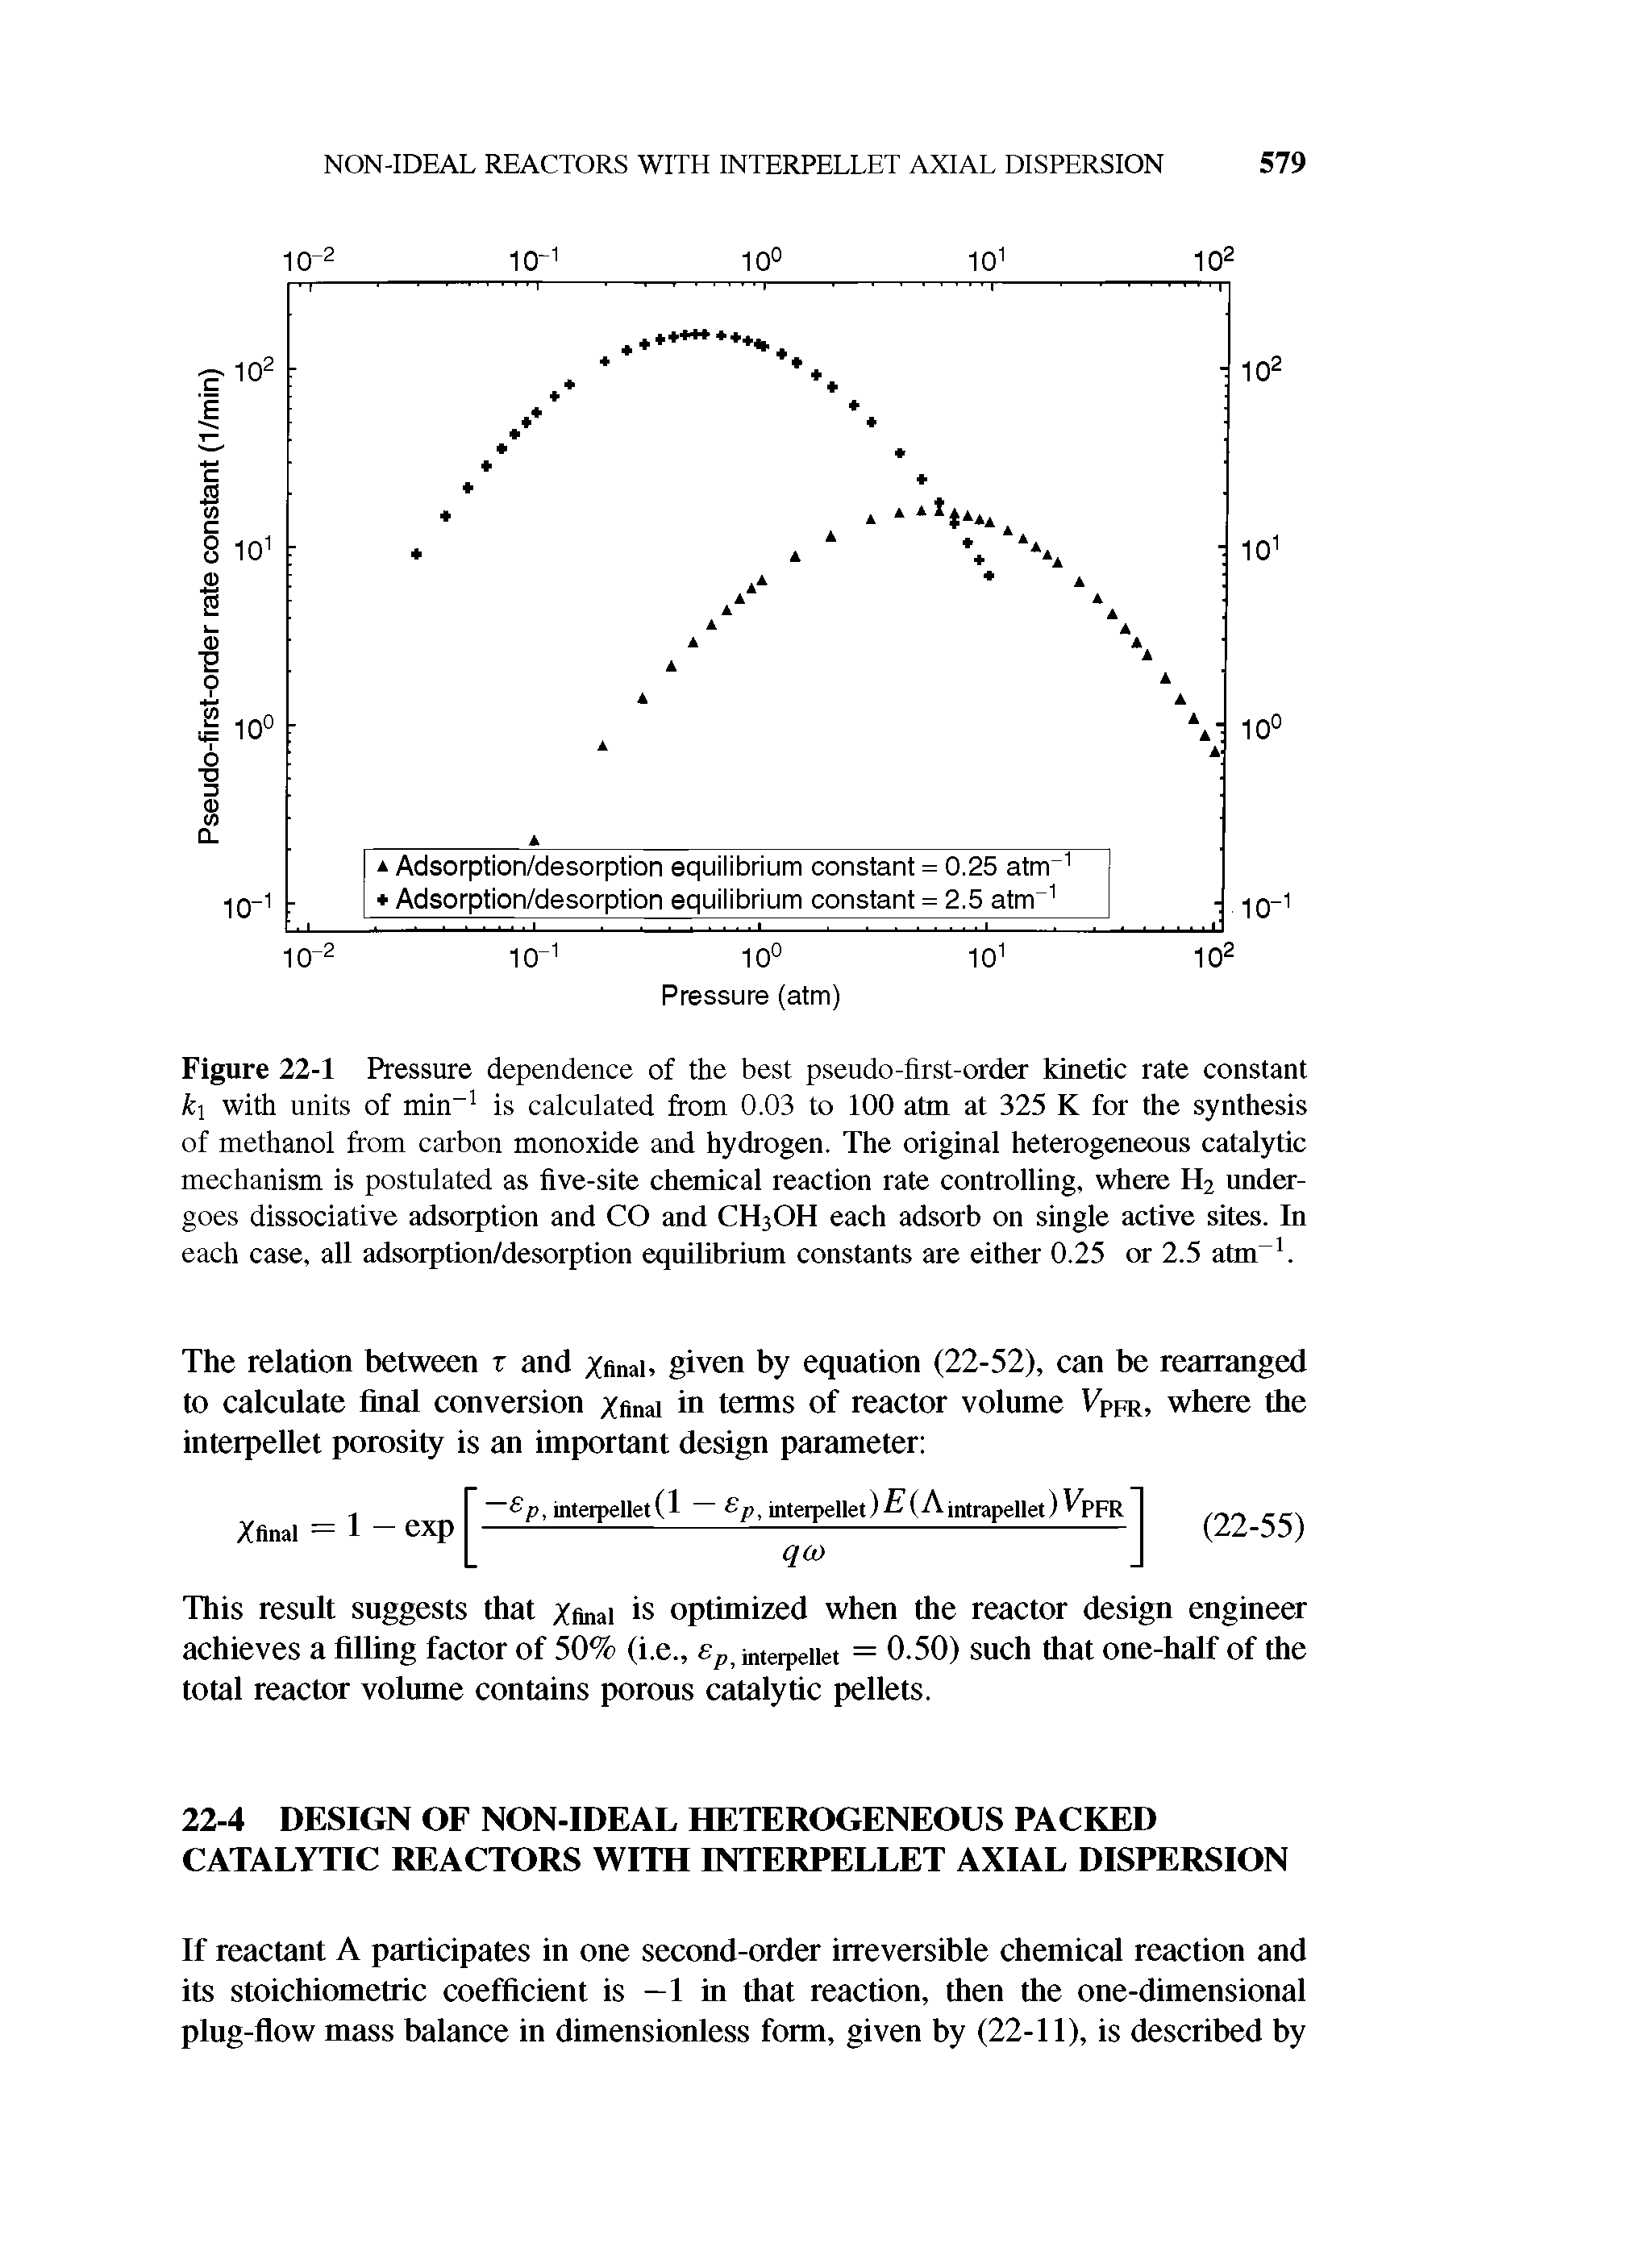 Figure 22-1 Pressure dependence of the best pseudo-first-order kinetic rate constant ki with units of min" is calculated from 0.03 to 100 atm at 325 K for the synthesis of methanol from carbon monoxide and hydrogen. The original heterogeneous catalytic mechanism is postulated as five-site chemicai reaction rate controiiing, whrae H2 unda--goes dissociative adsorption and CO and CH3OH each adsorb on singie active sites. In each case, all adsorption/desorption equilibrium constants are either 0.25 or 2.5 atm. ...